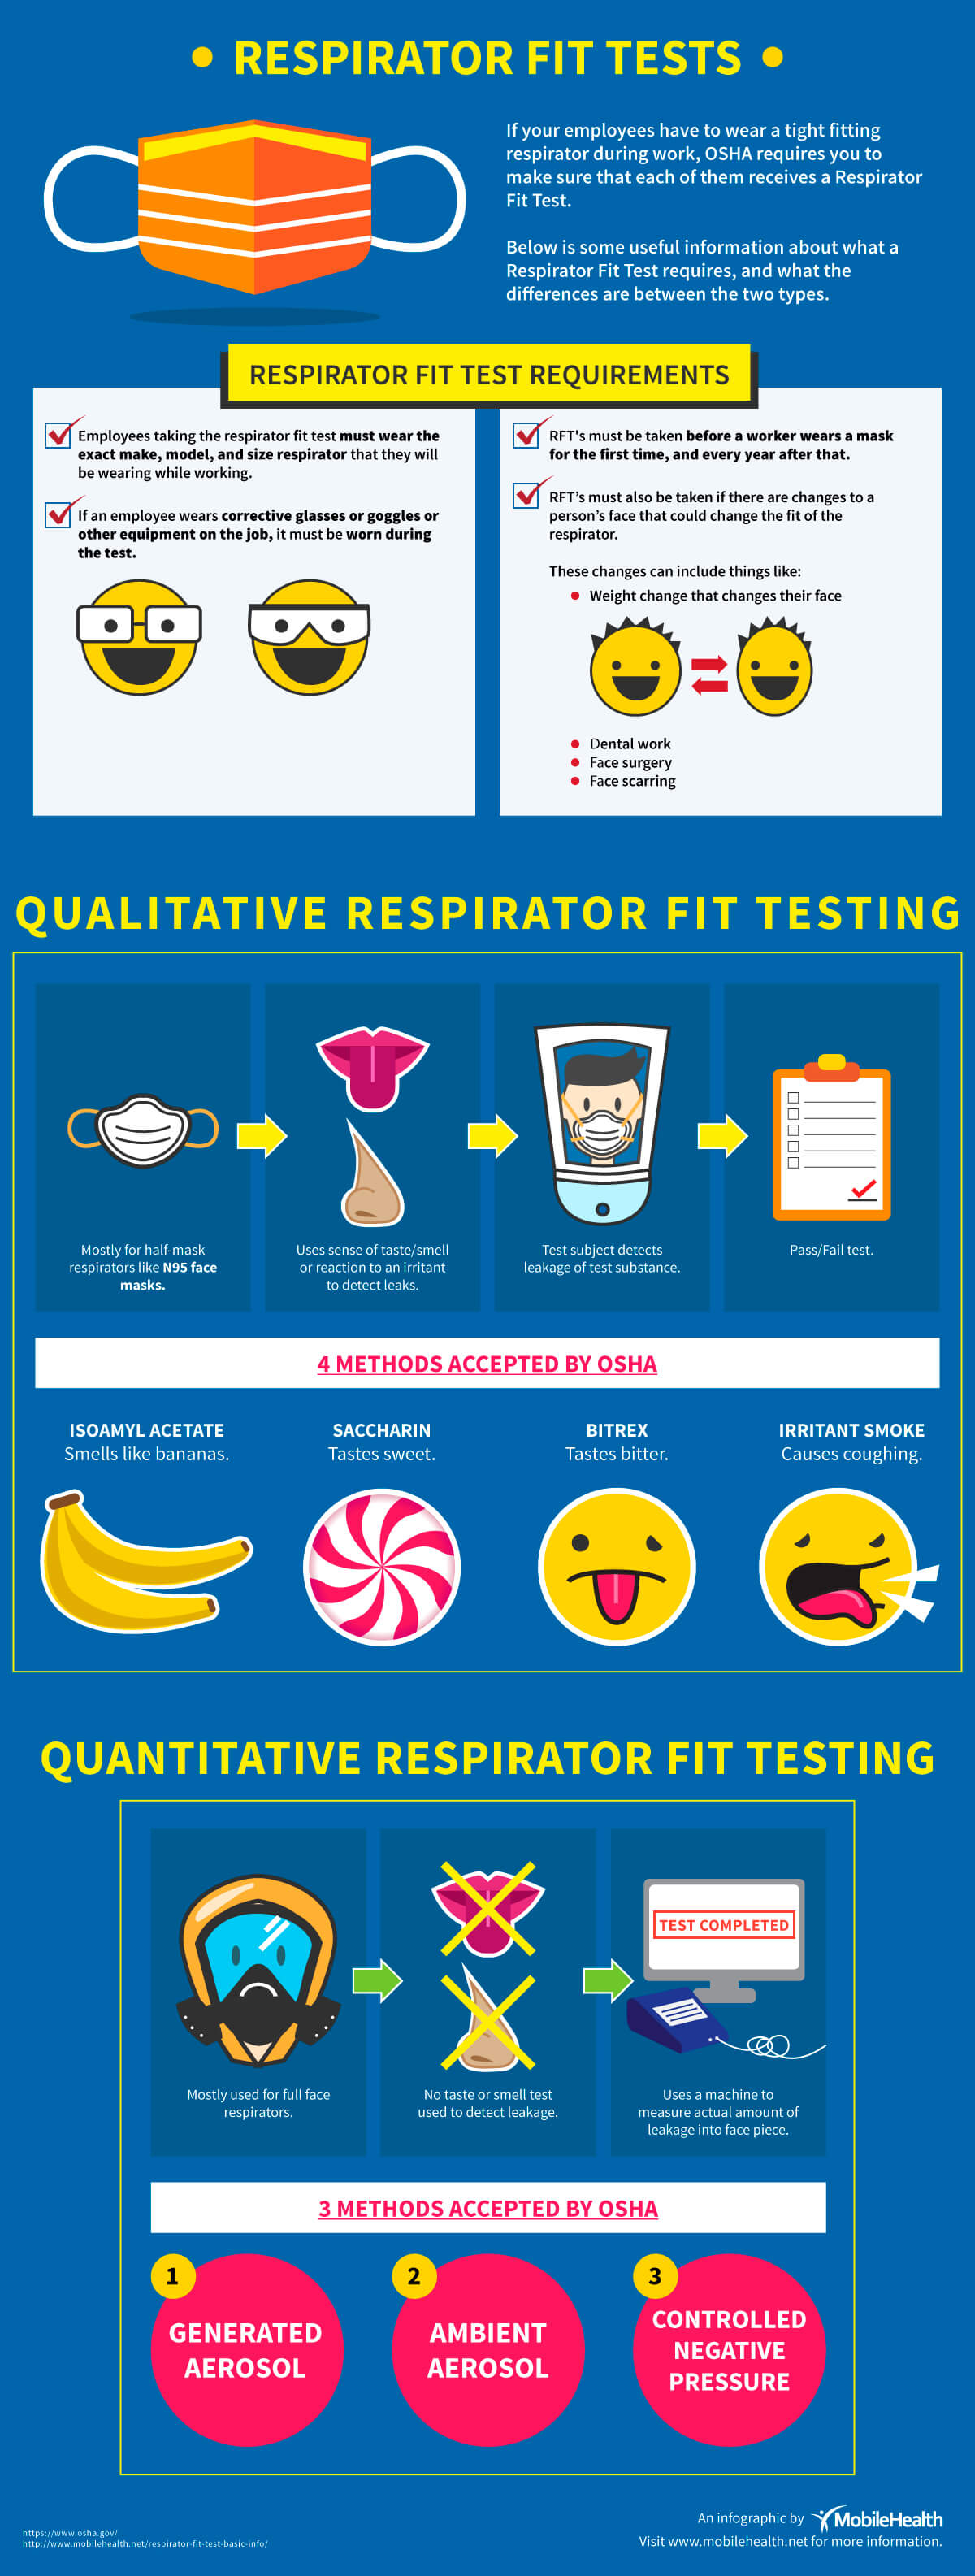 Respirator-Fit-Test-infographic-plaza